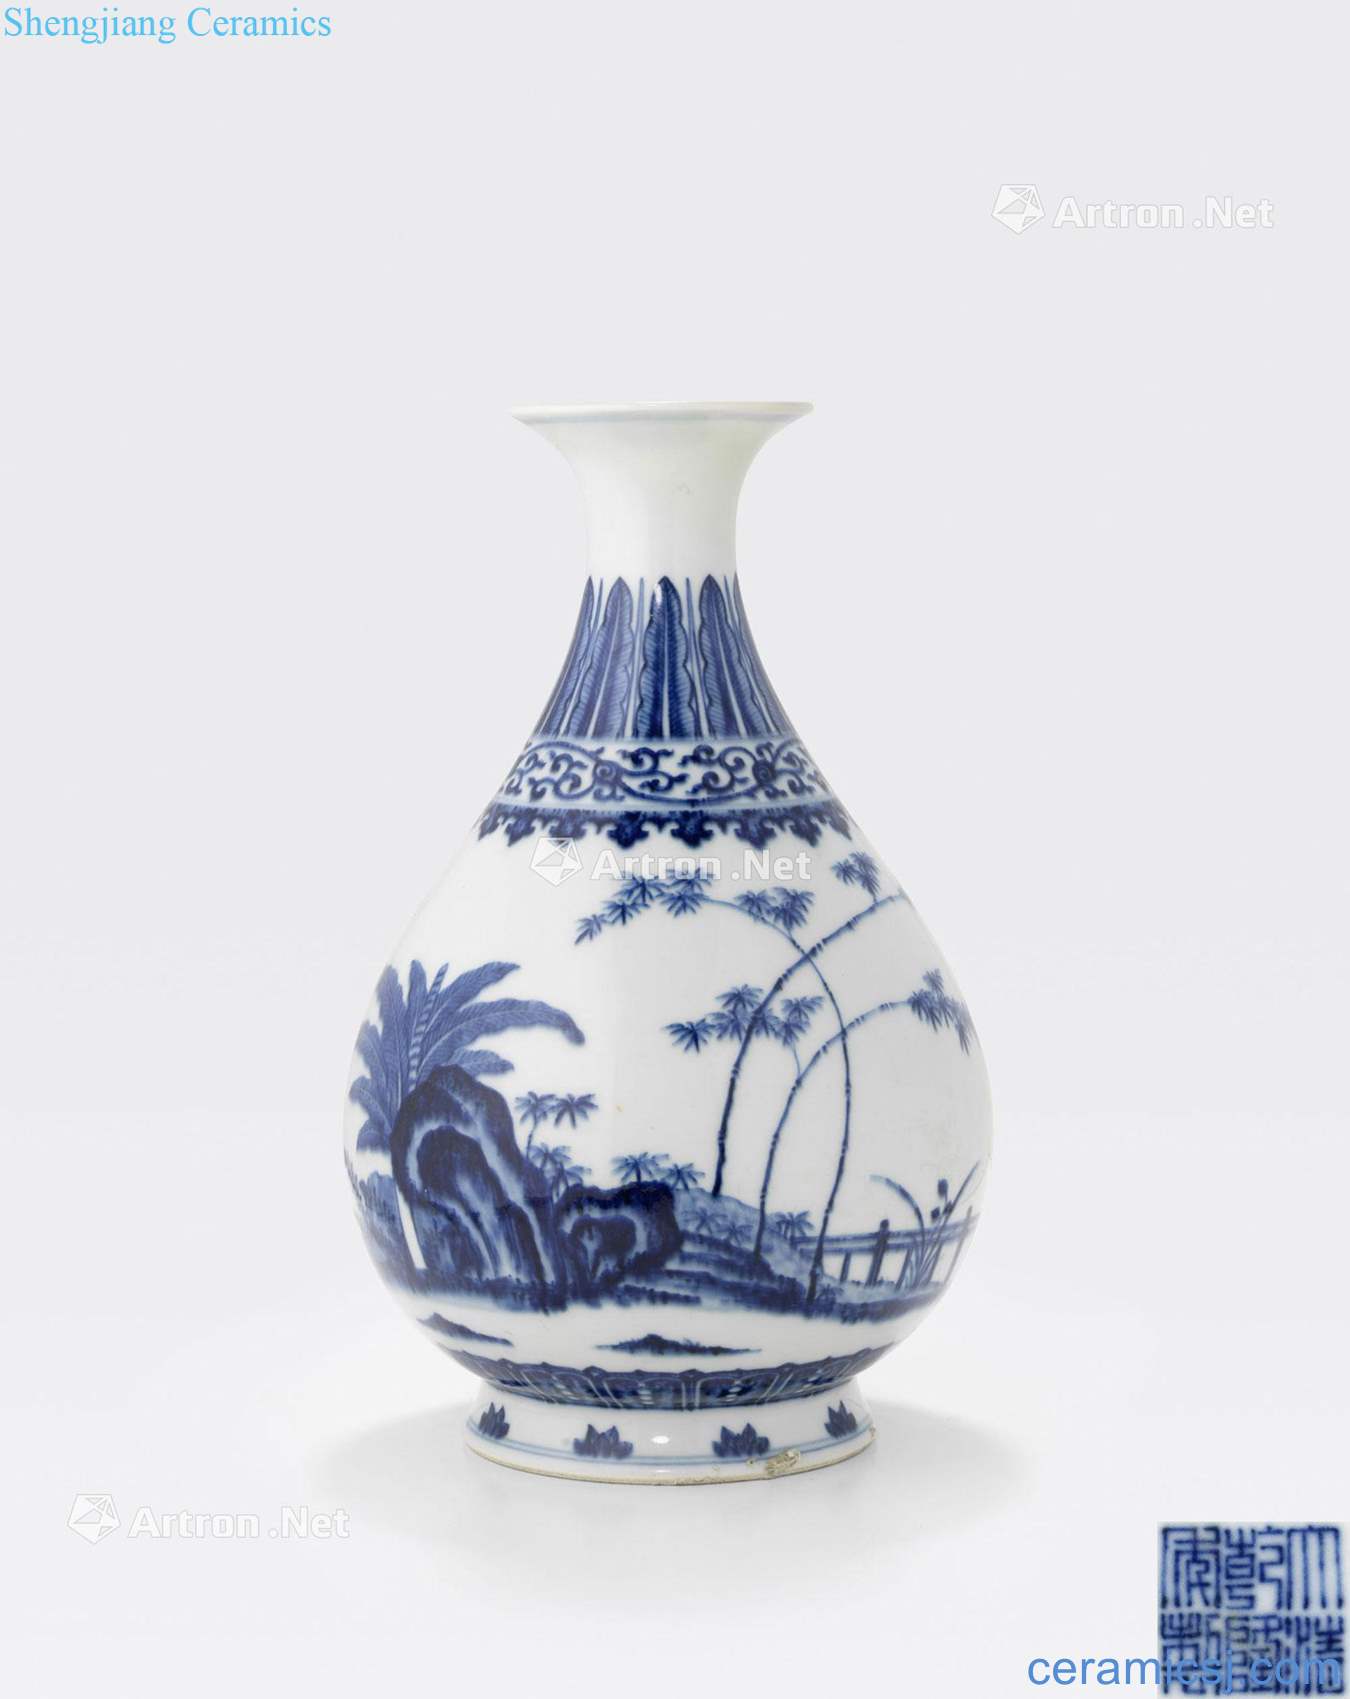 The Six - character Qianlong mark and of the period of A MING STYLE BLUE and WHITE BOTTLE VASE, YUHUCHUNPING